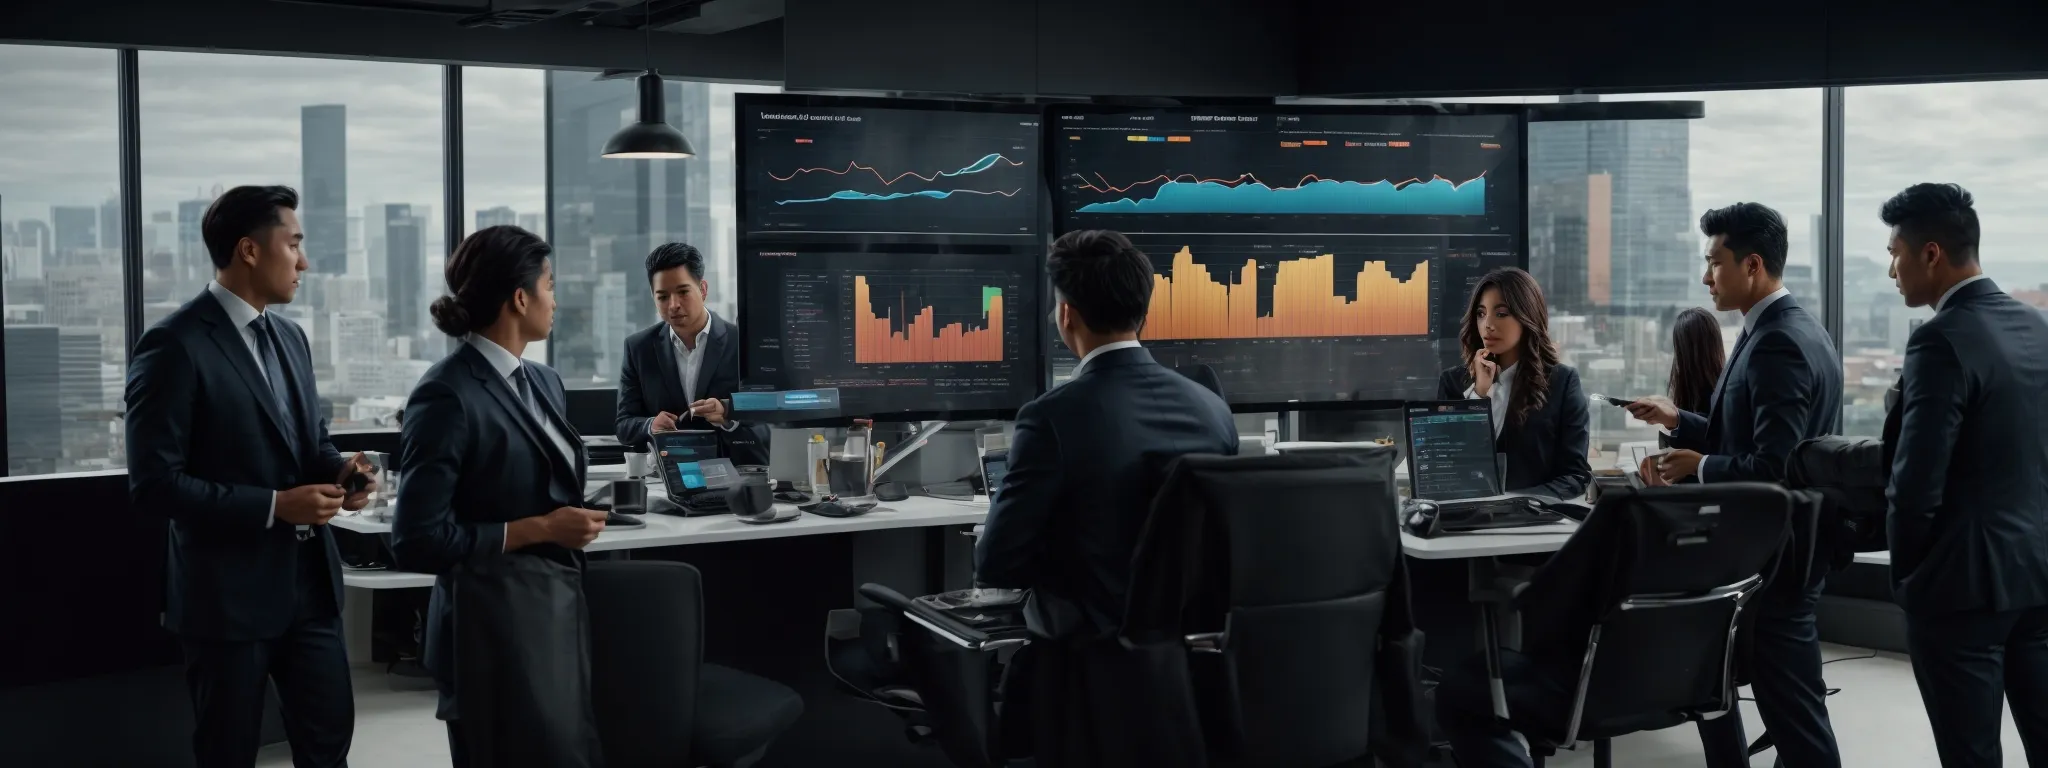 a dynamic group of professionals gathers around a sleek, high-tech dashboard displaying real-time sales analytics and progress charts.